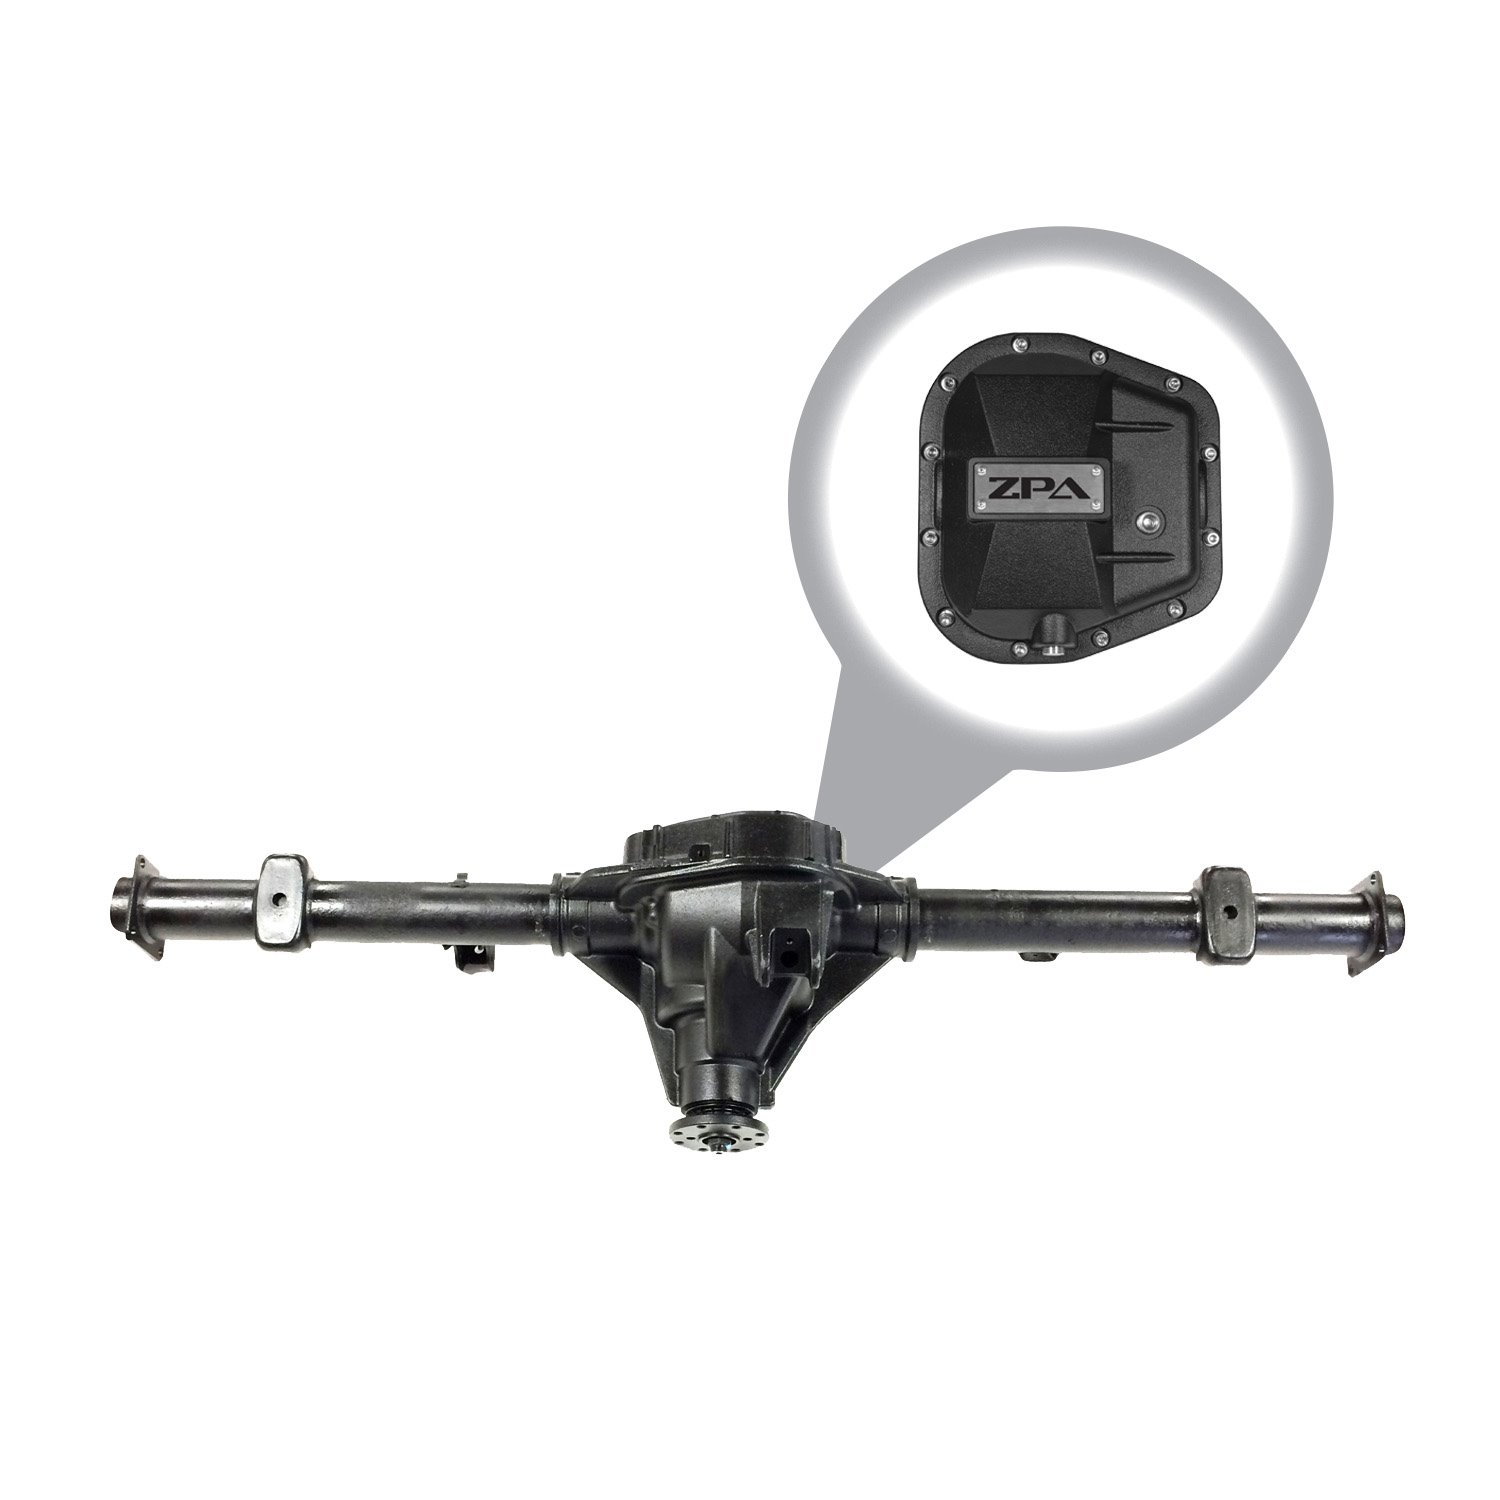 RAA435-2209X2-P Rear Axle Assembly, Ford 9.75, '04-'08 Ford F150 (Exc Heritge), 4.56 Ratio, Duragrip